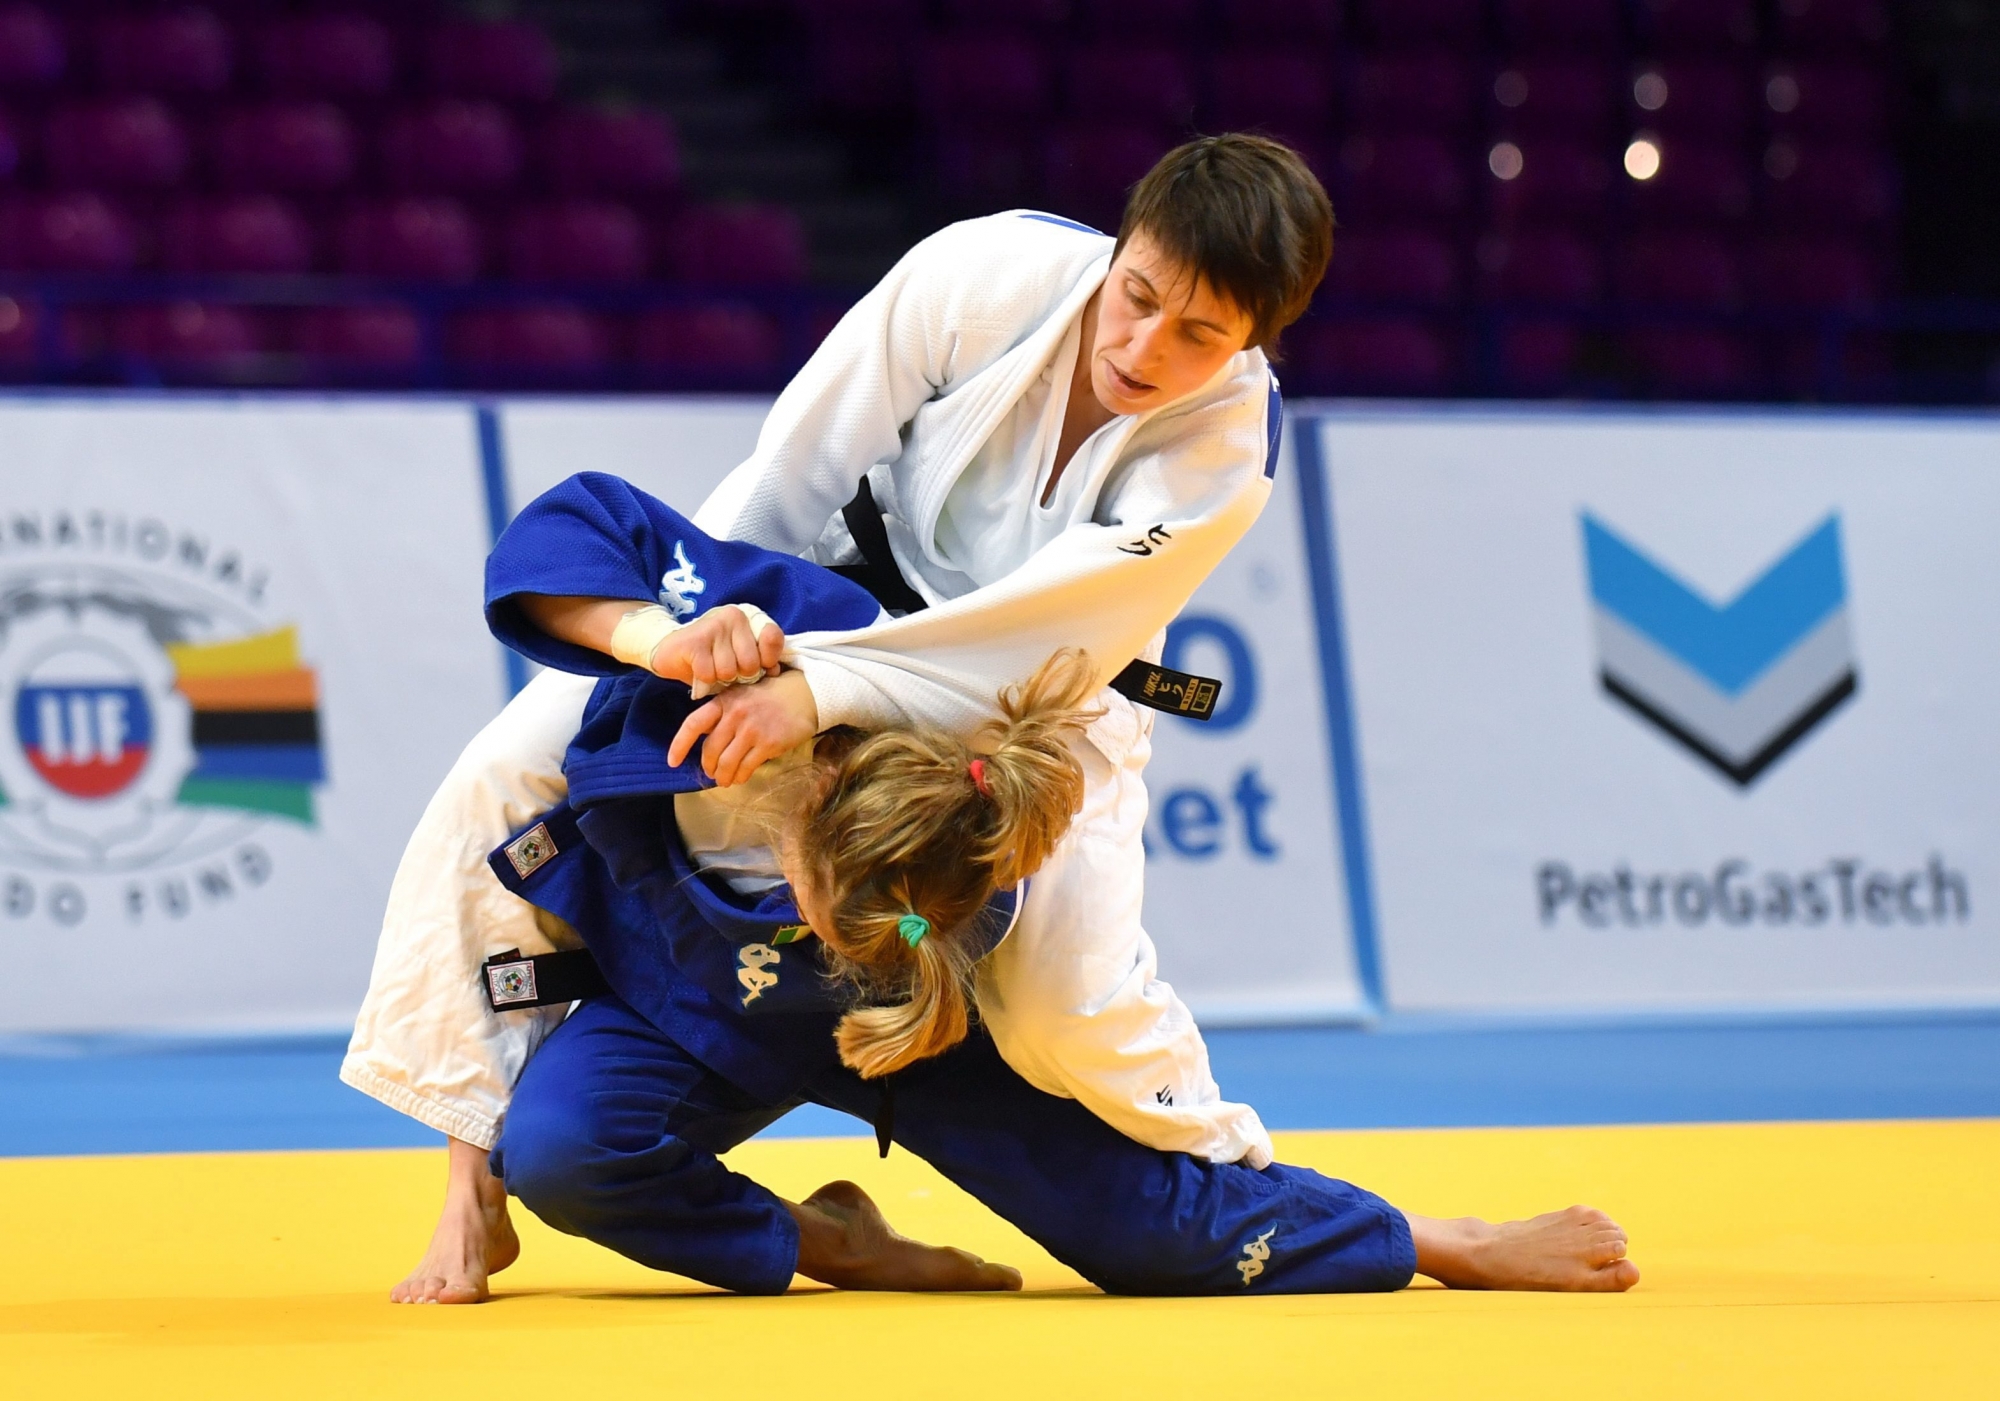 Evelyne Tschopp (white) of Switzerland and Odette Giuffrida (blue) of Italy are seen in action during the bronze medal fight in the -52 kg women category, during the first day of the European Judo Championships 2017 at Torwar Hall in Warsaw, Poland, 20 April 2017. Evelyne Tschopp won the bronze medal. (KEYSTONE/PAP/Bartlomiej Zborowski) POLAND JUDO EUROPEAN CHAMPIONSHIPS 2017